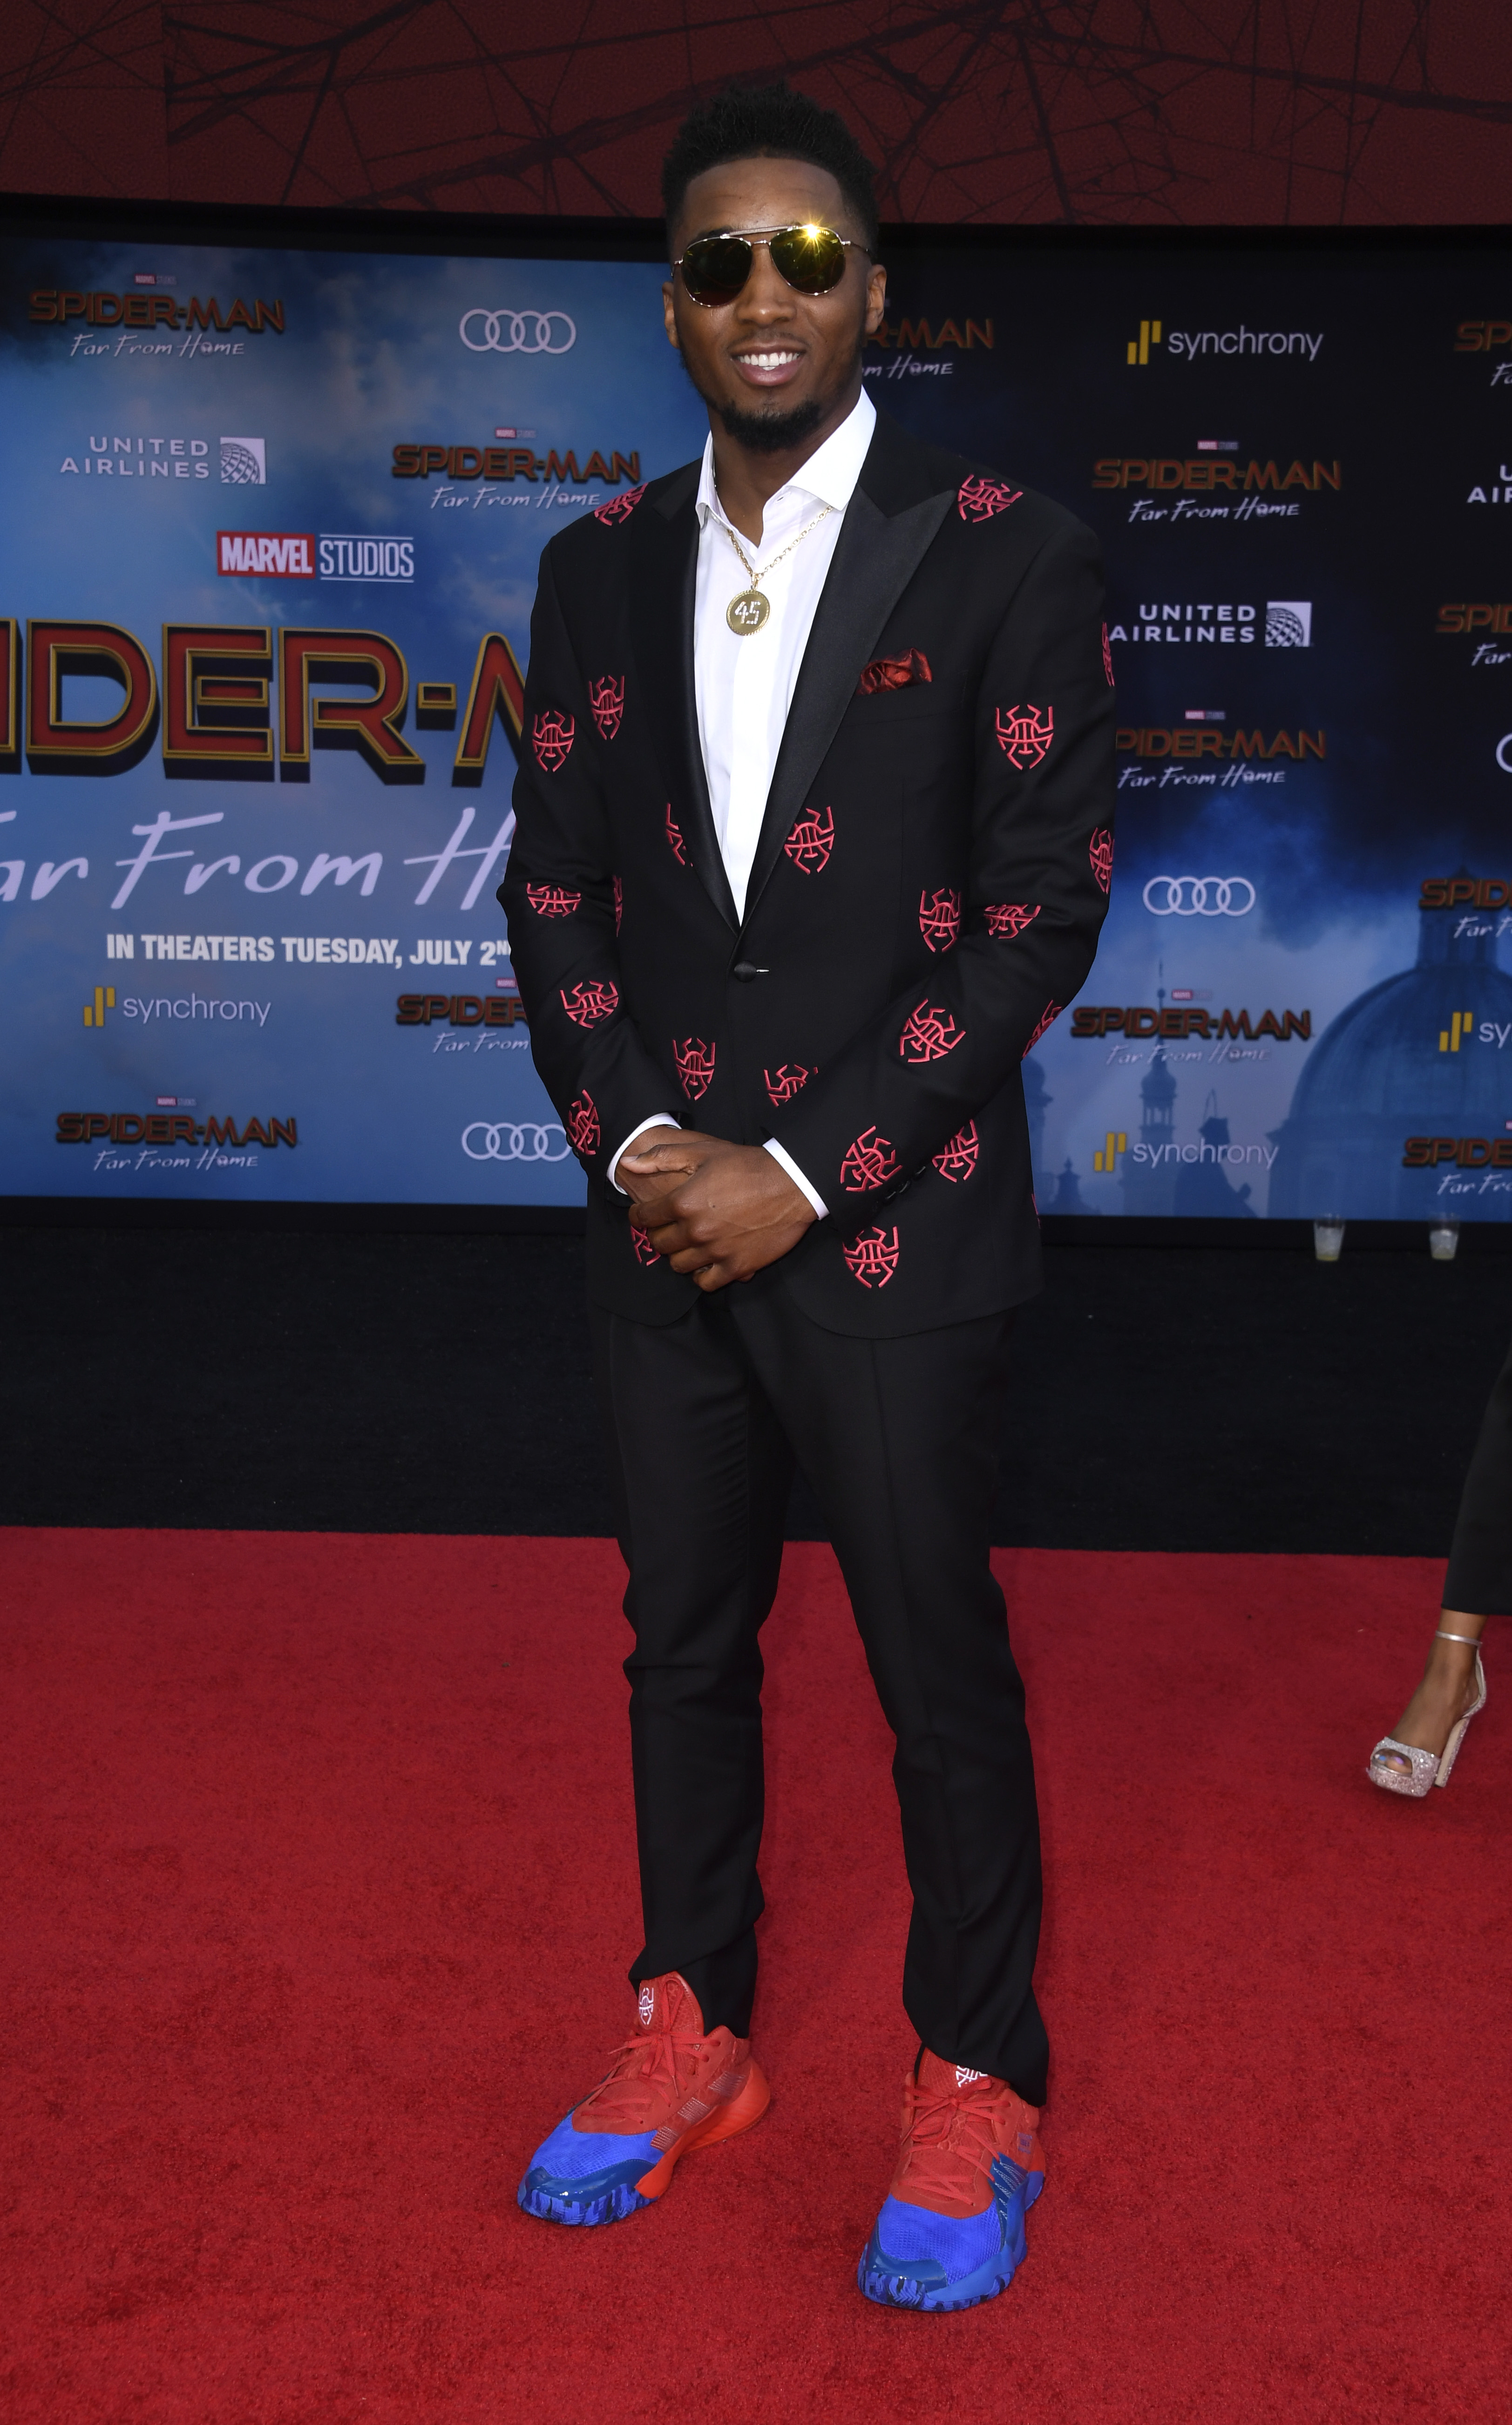 Premiere Of Sony Pictures’ “Spider-Man Far From Home” - Arrivals